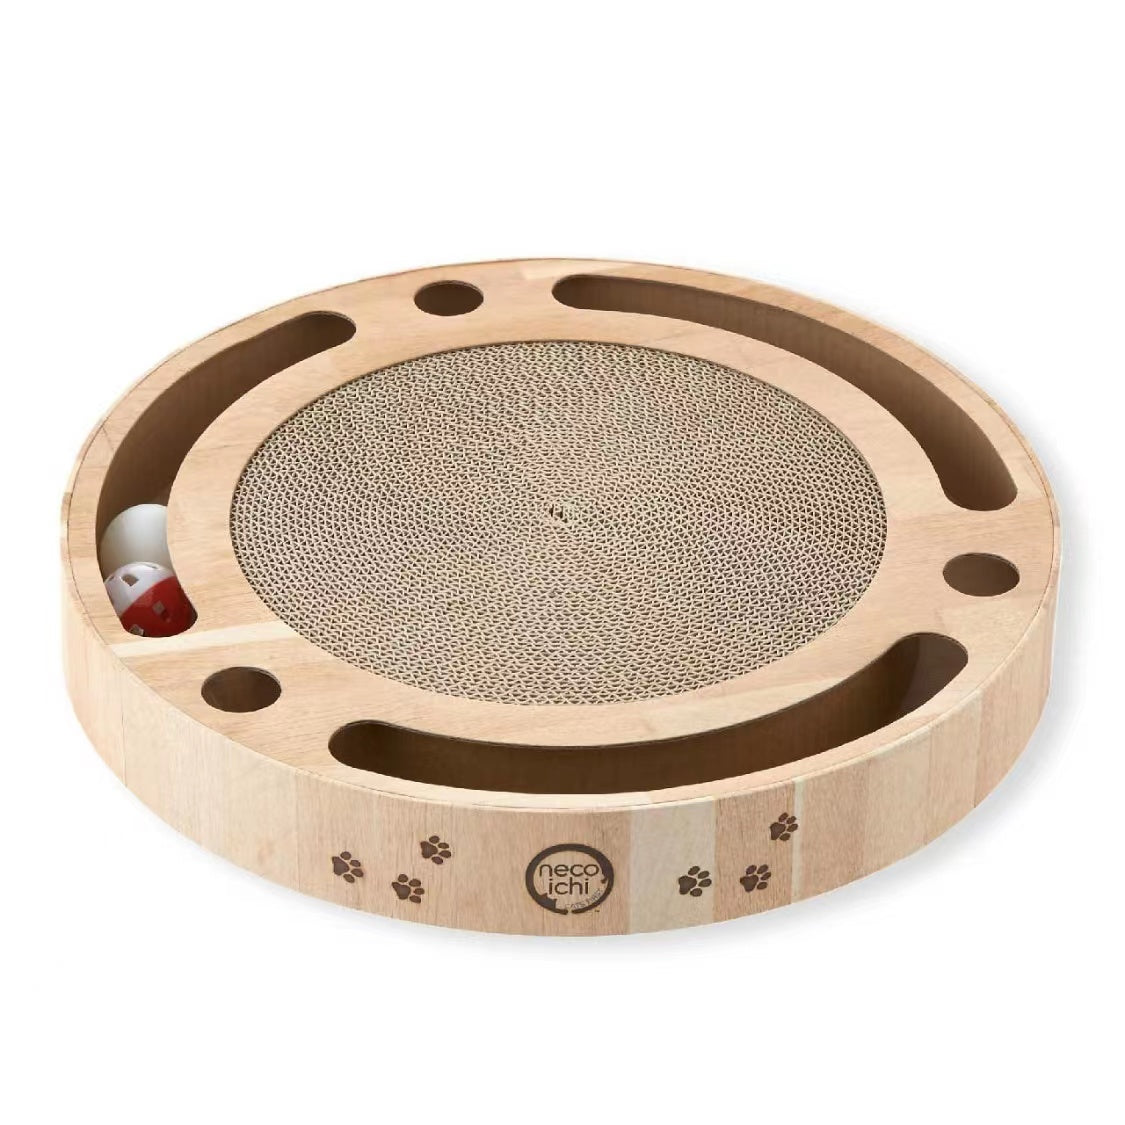 INTERACTIVE TRACK BALL CAT SCRATCHER TOY